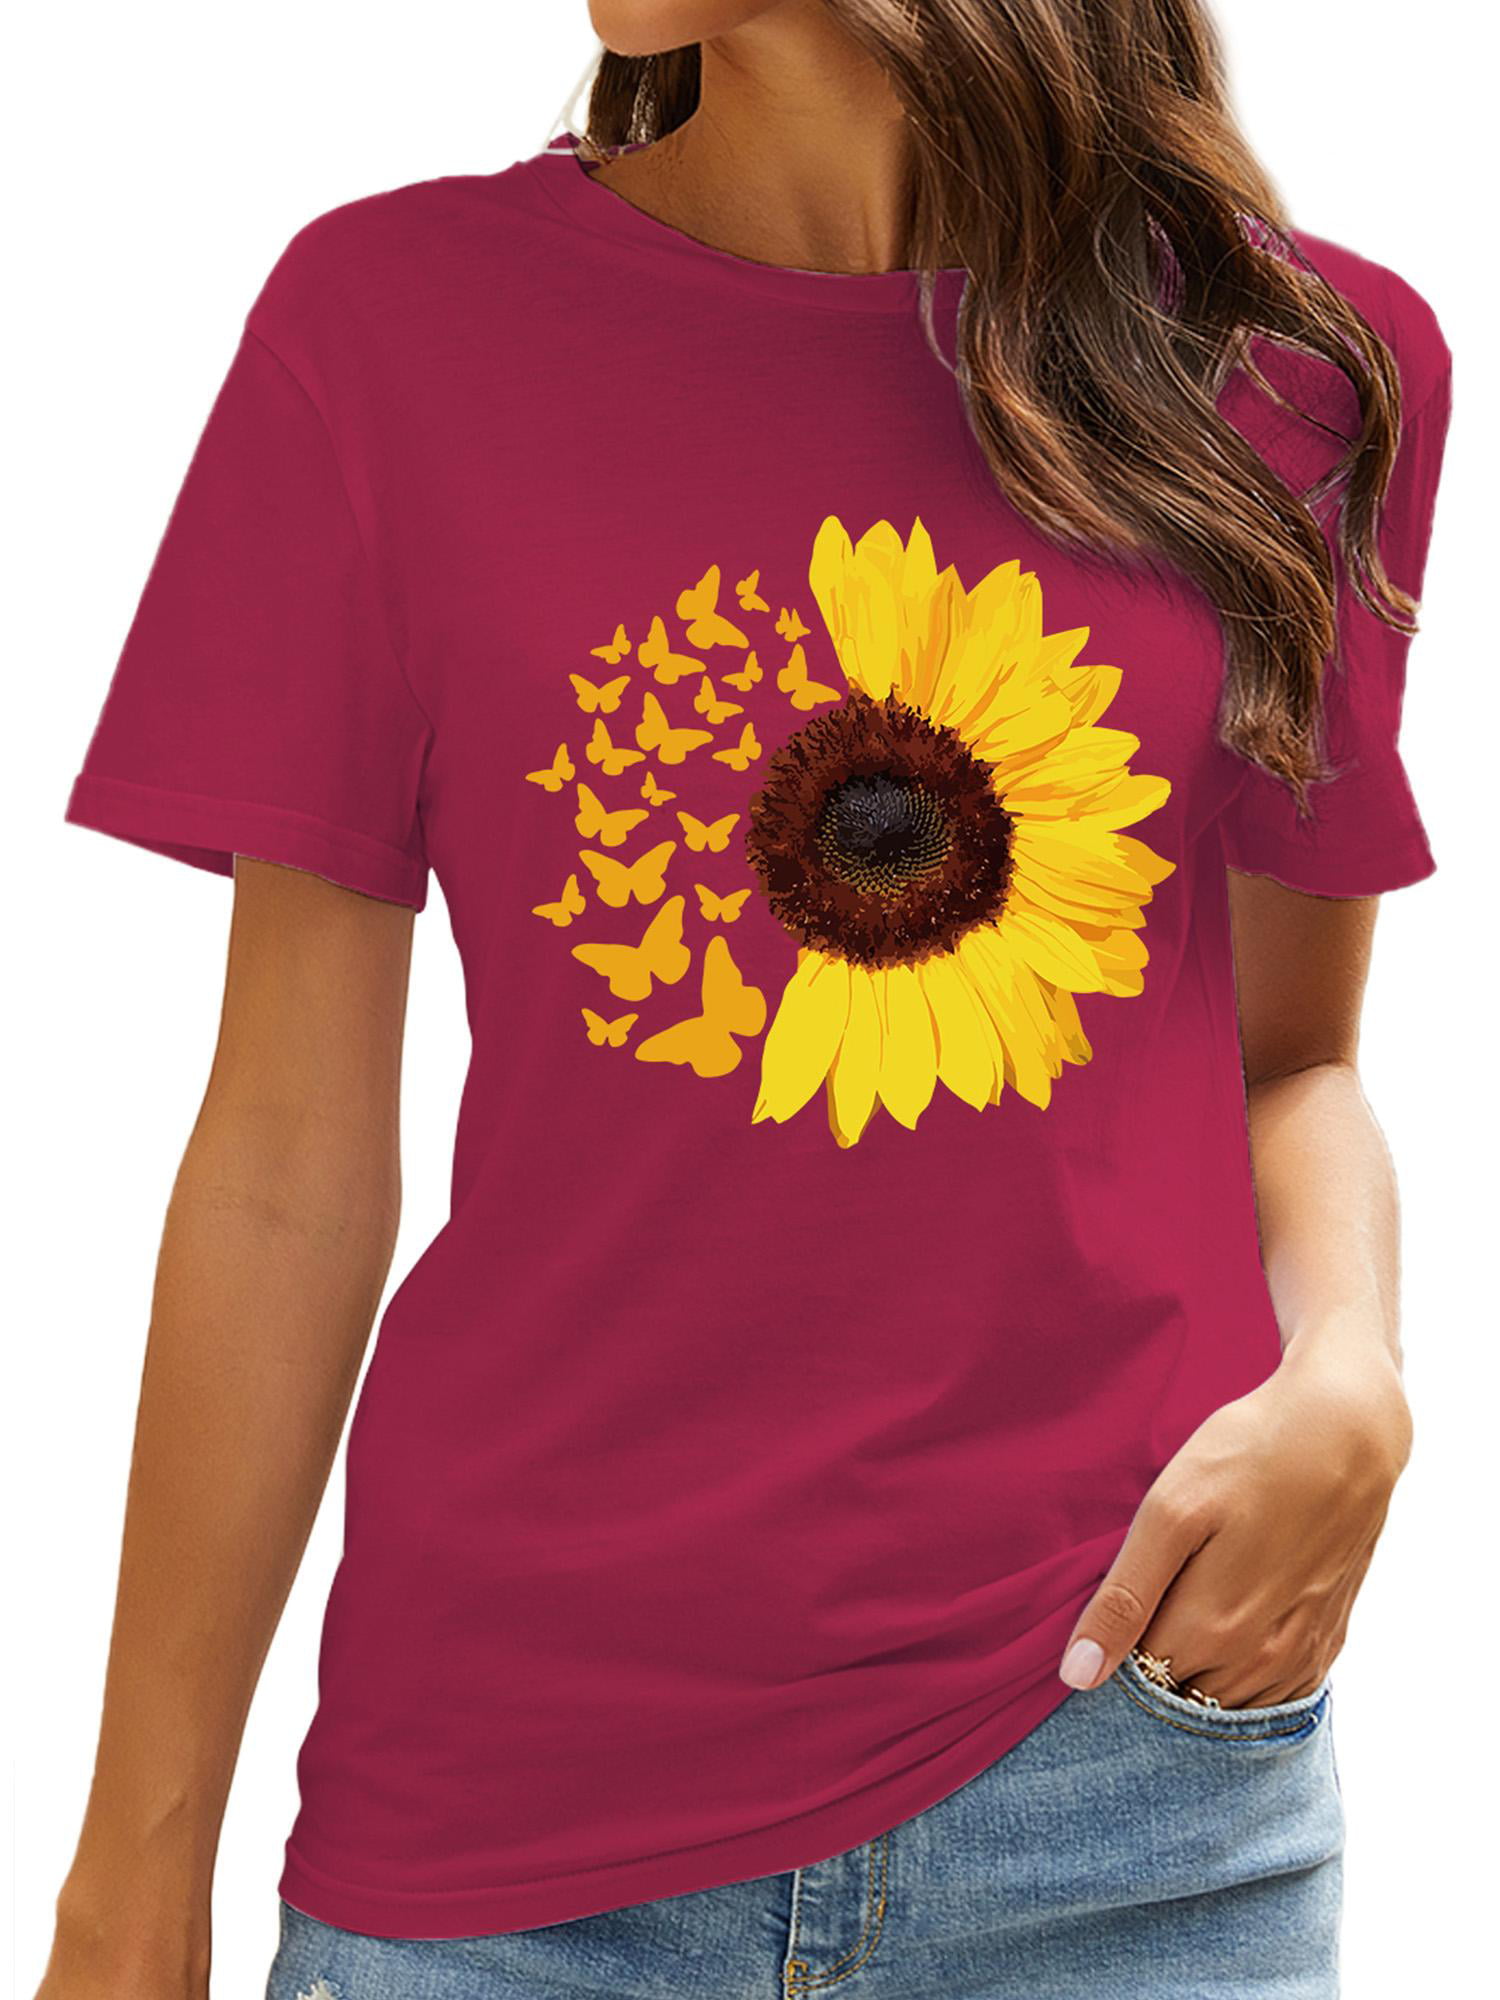 Womens Round Neck Tshirts Cute Butterfly Sunflower Printing Vacation Casual Tops Summer Graphic Tees for Teen Girls